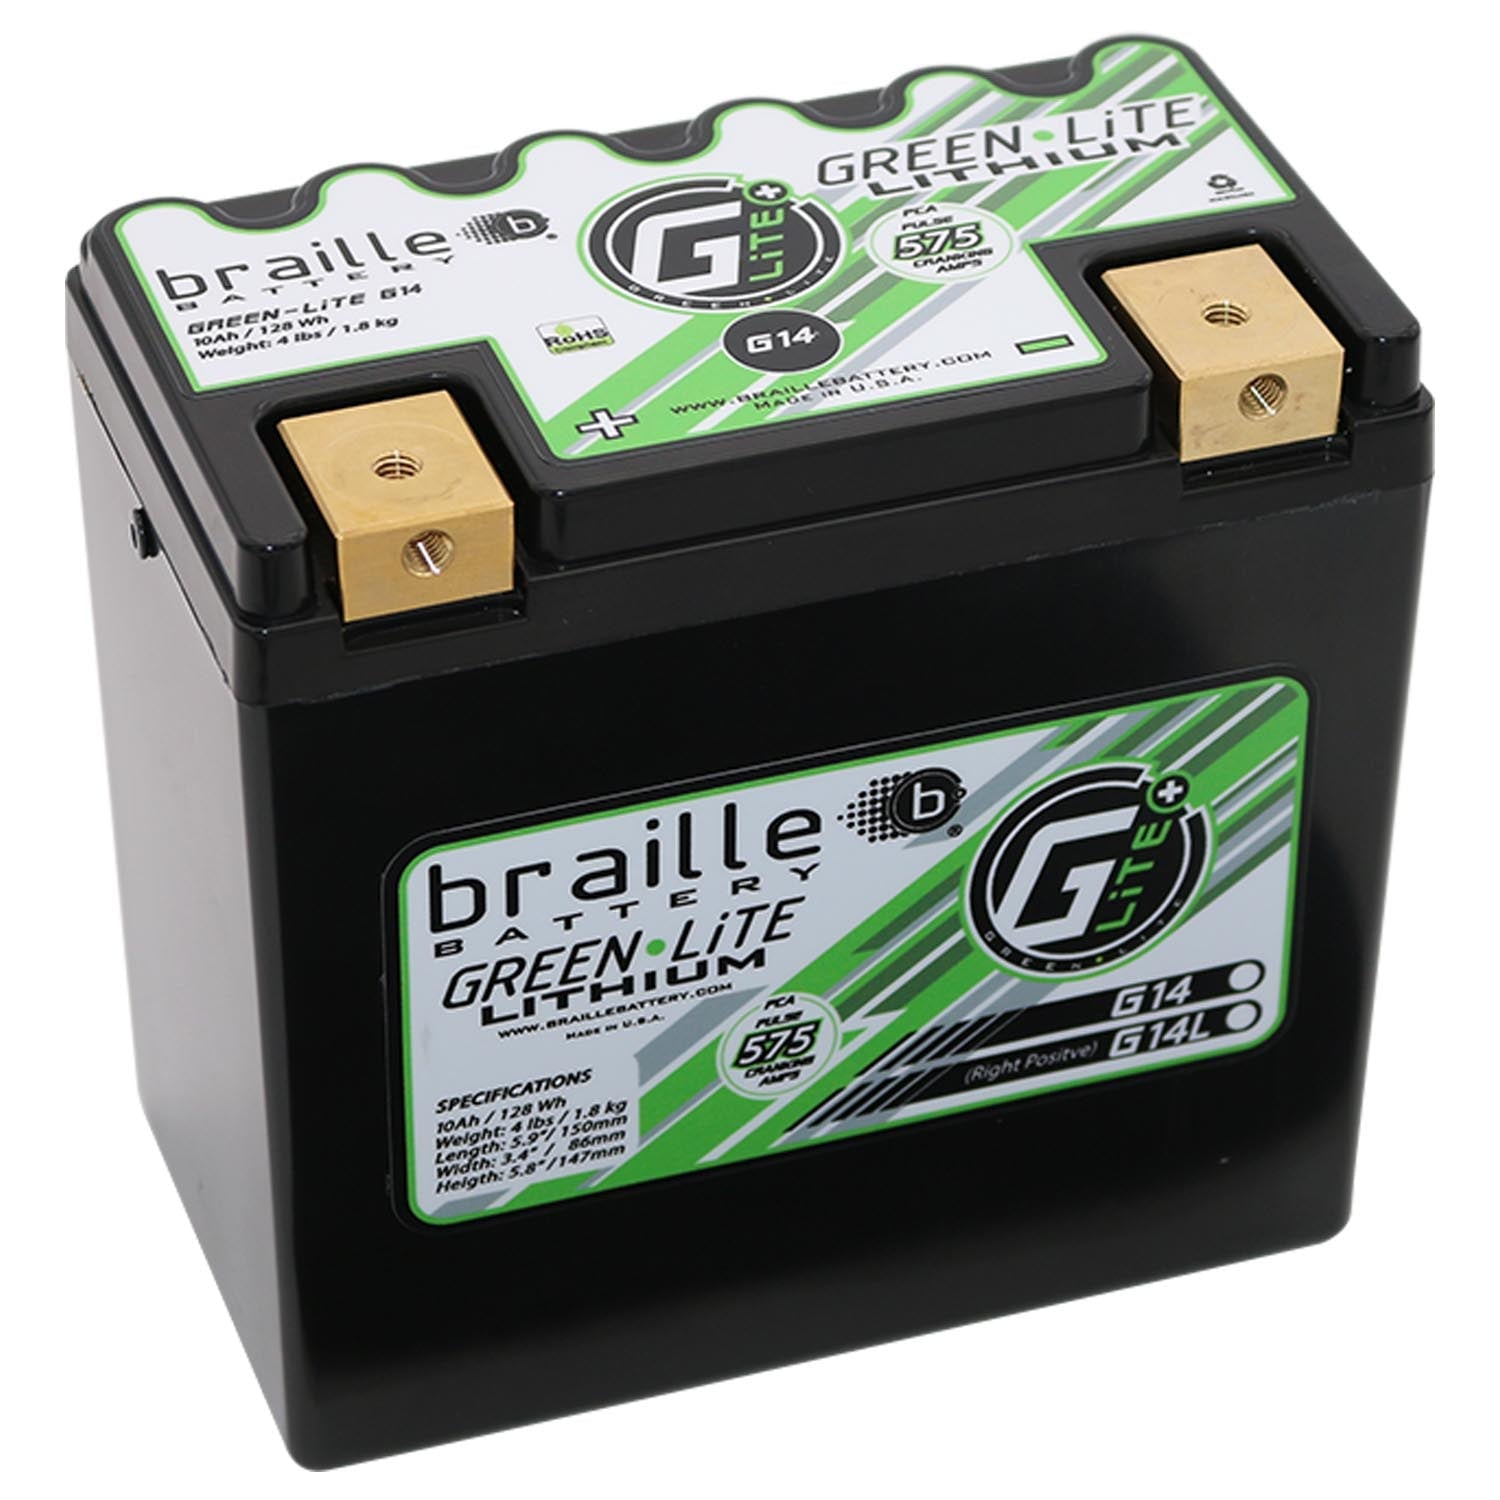 G14S Green-Lite Lithium-Ion 12 V Powersports Battery, BCI